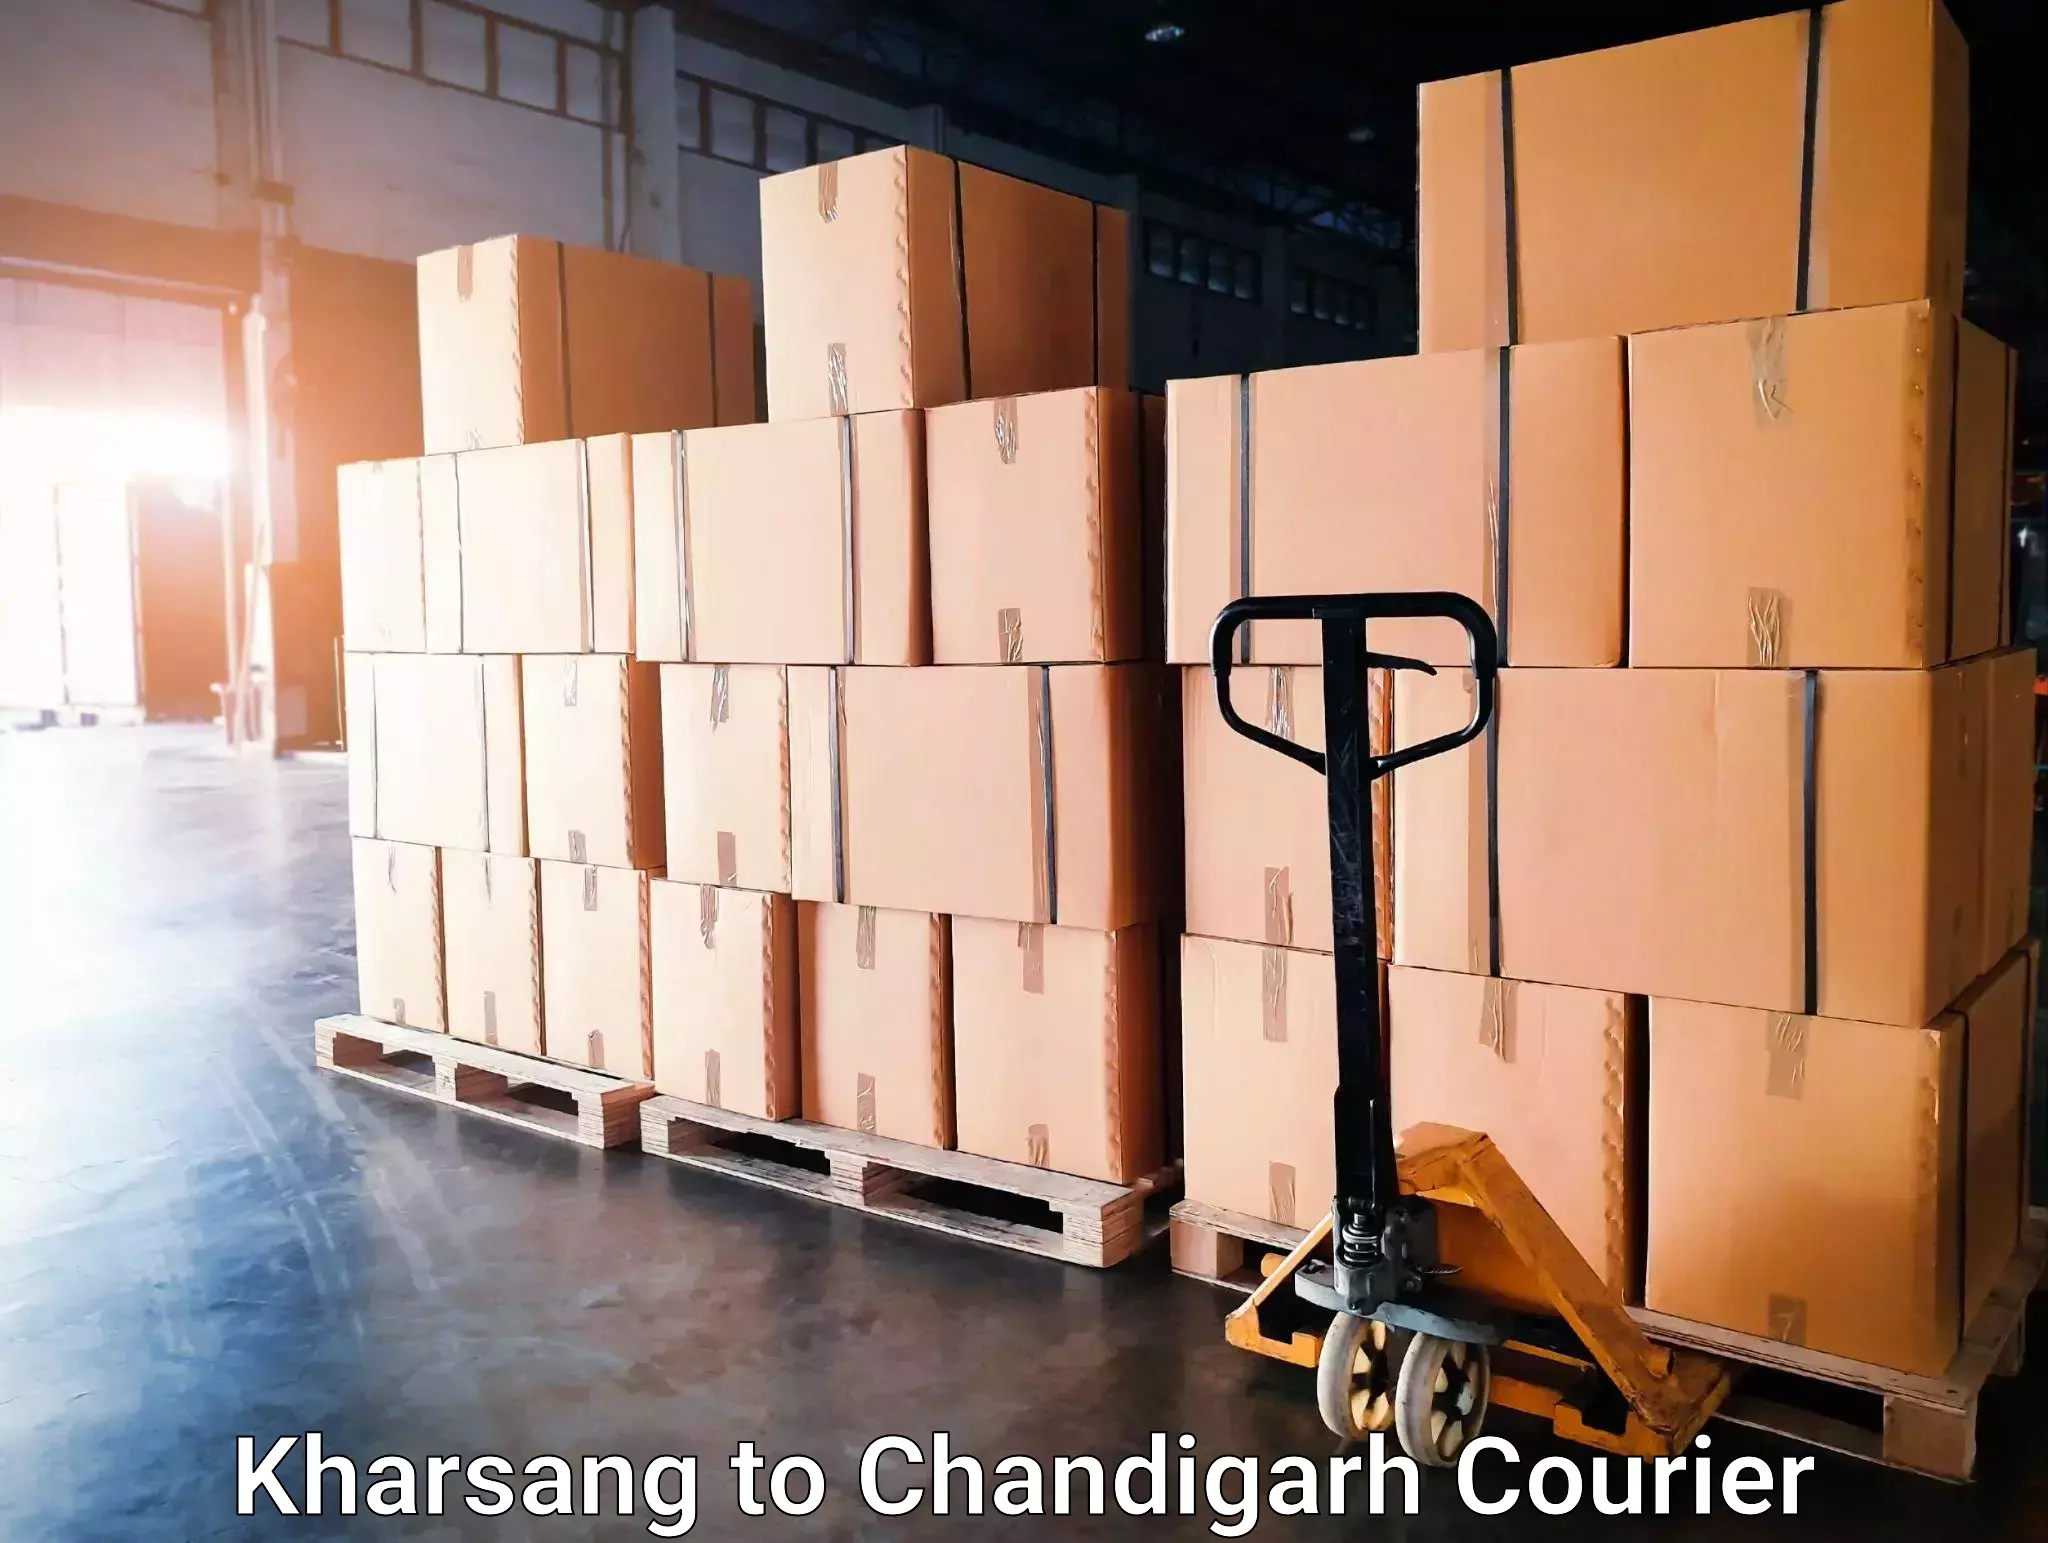 Flexible delivery scheduling Kharsang to Chandigarh